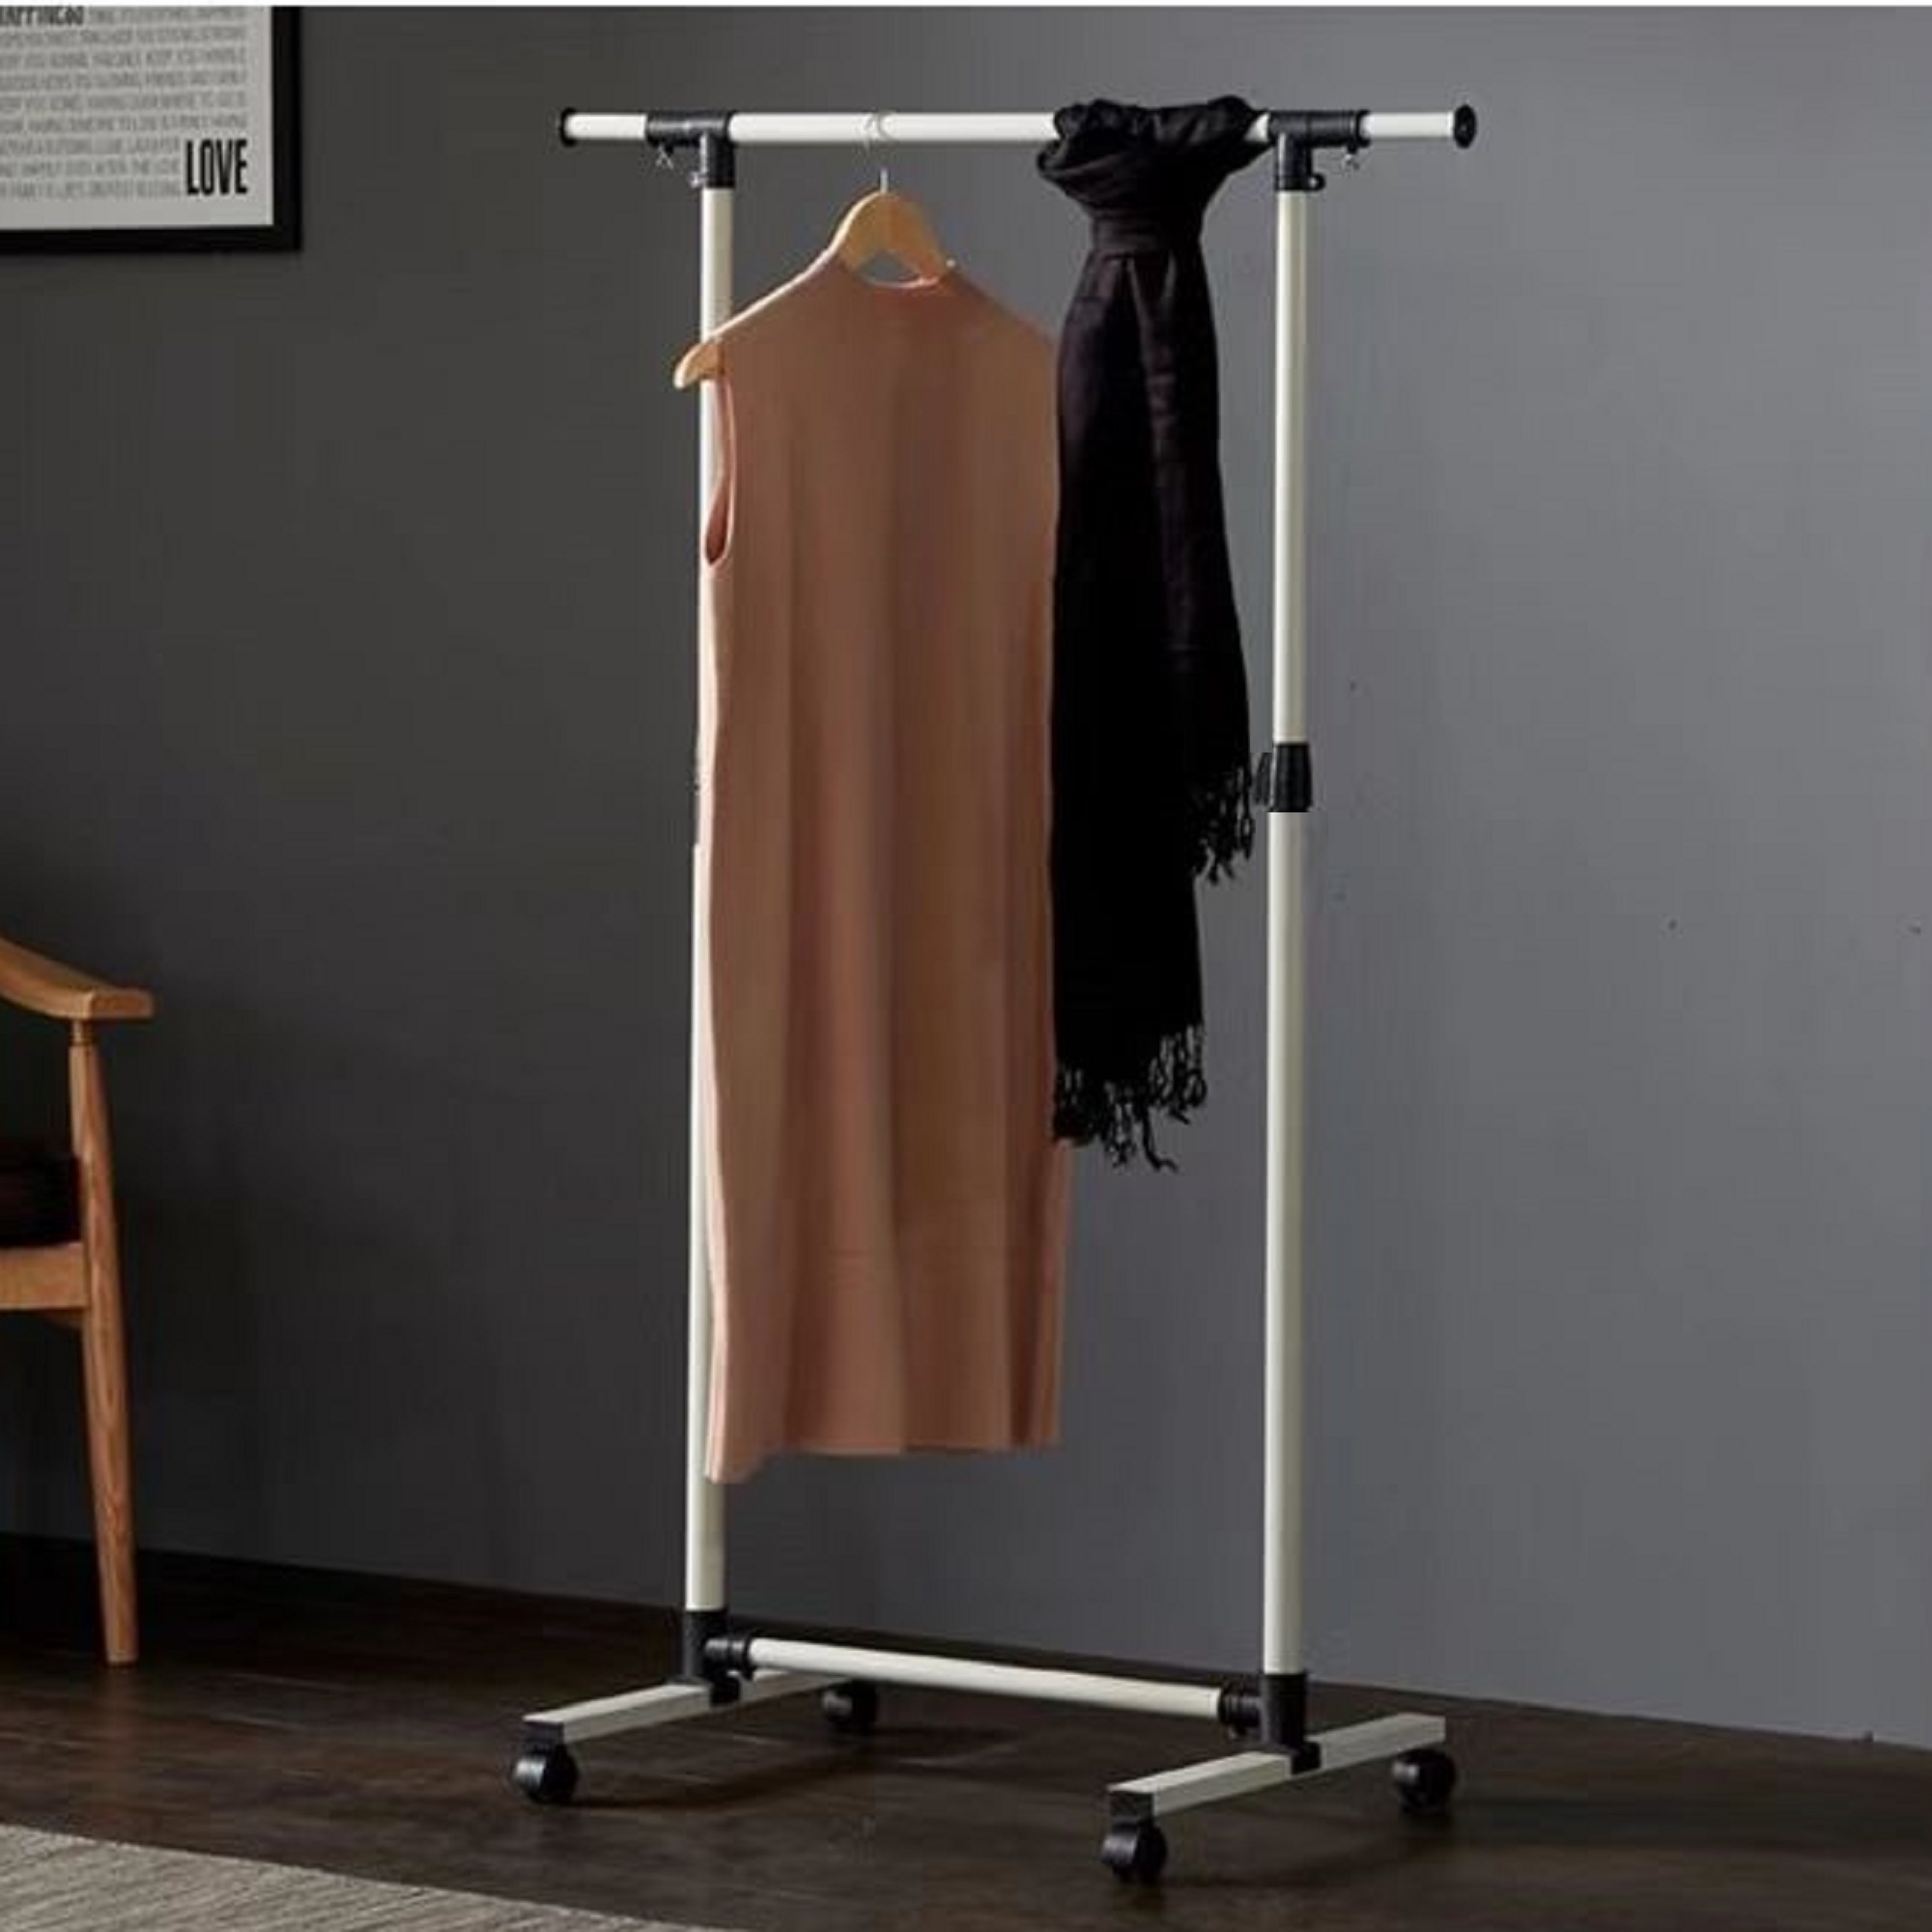 Standard Rod Clothing Garment Rack, Rolling Clothes Organizer on Wheels for Hanging Clothes, steel